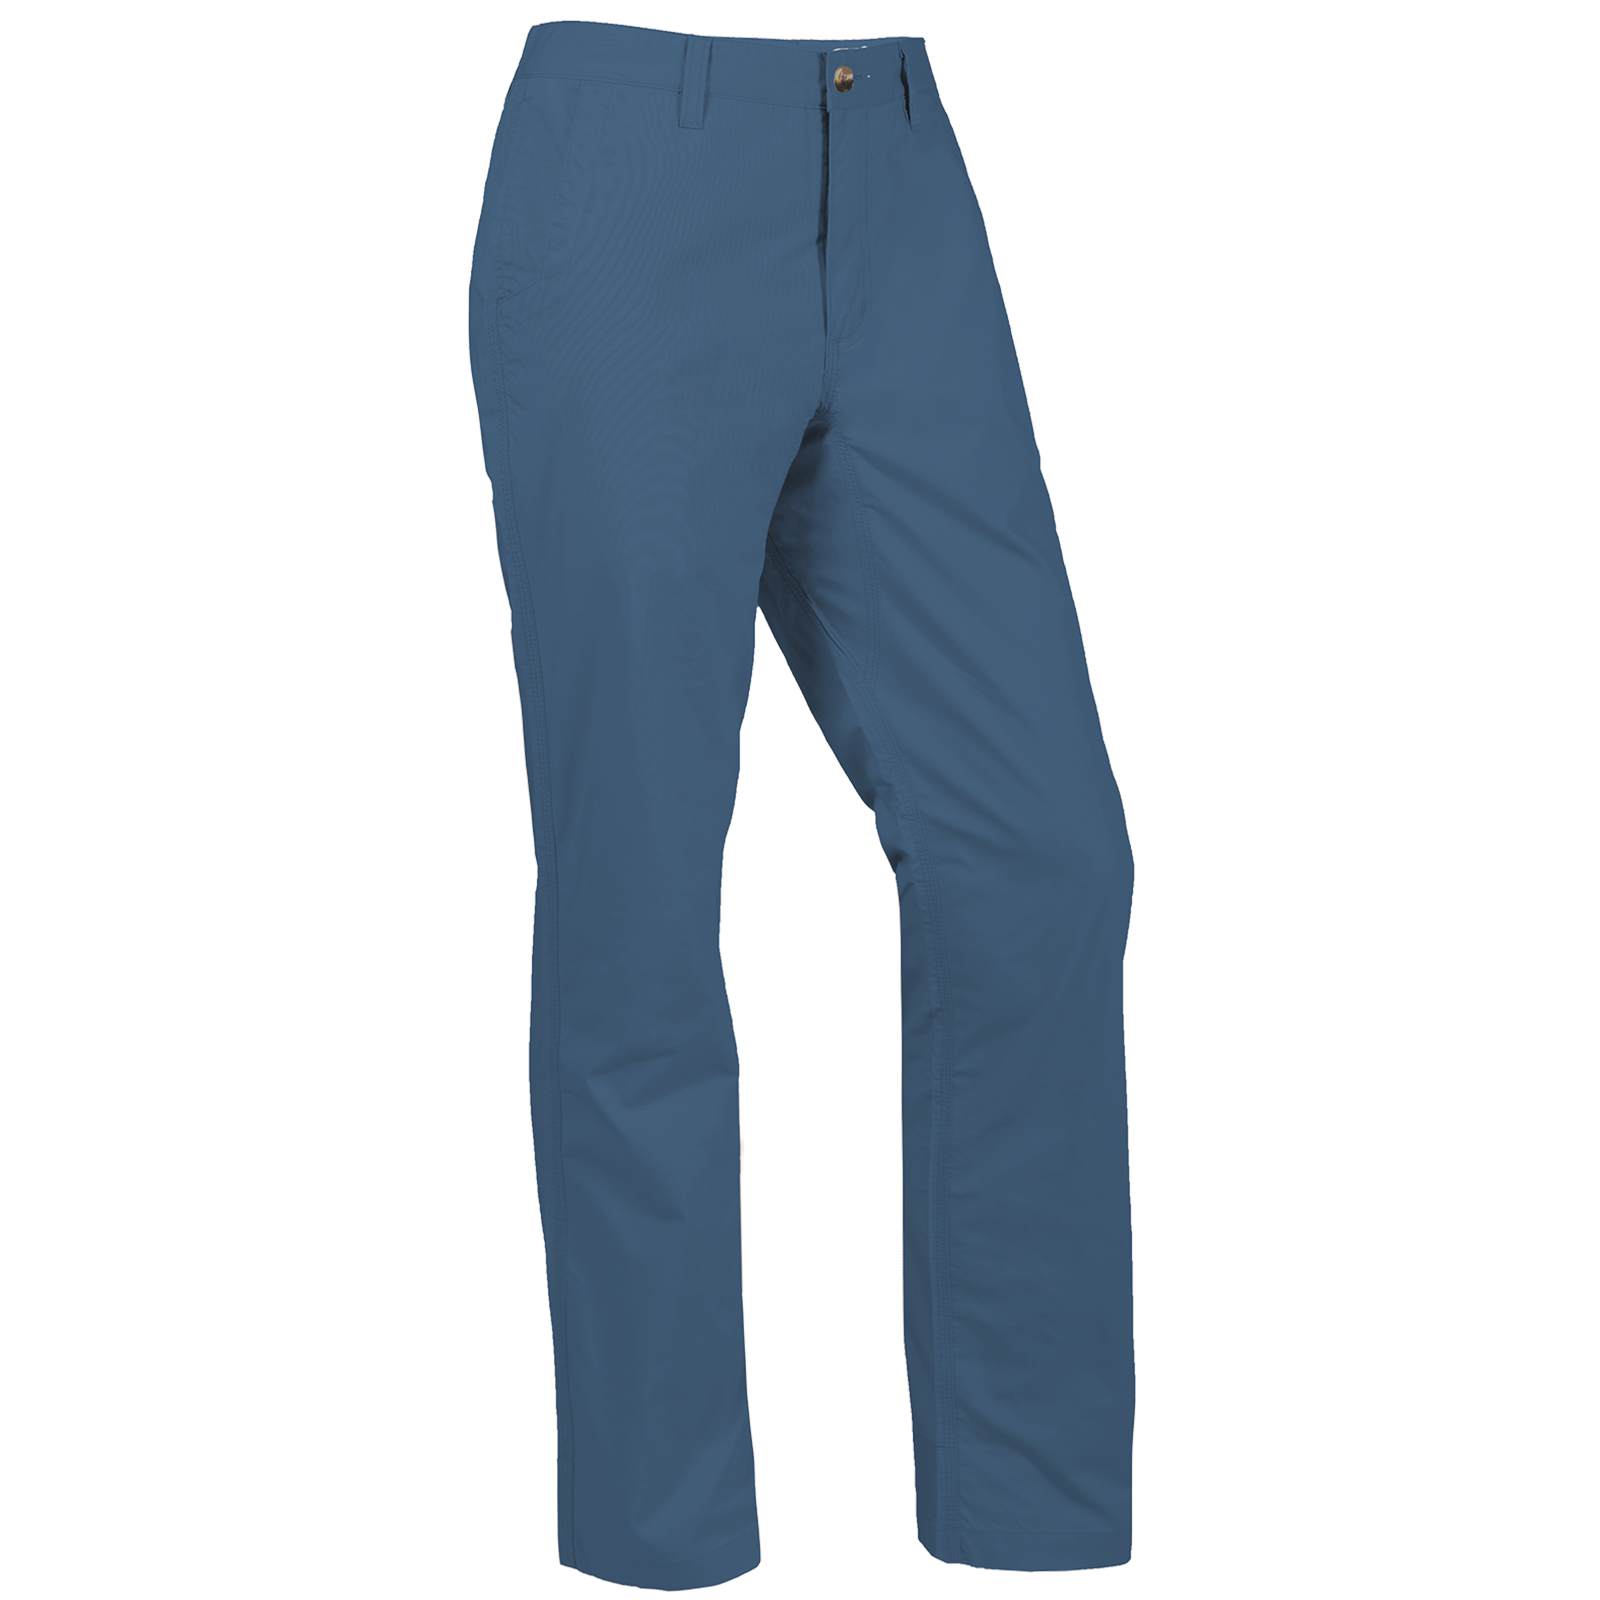 Men's Lined Mountain Pant